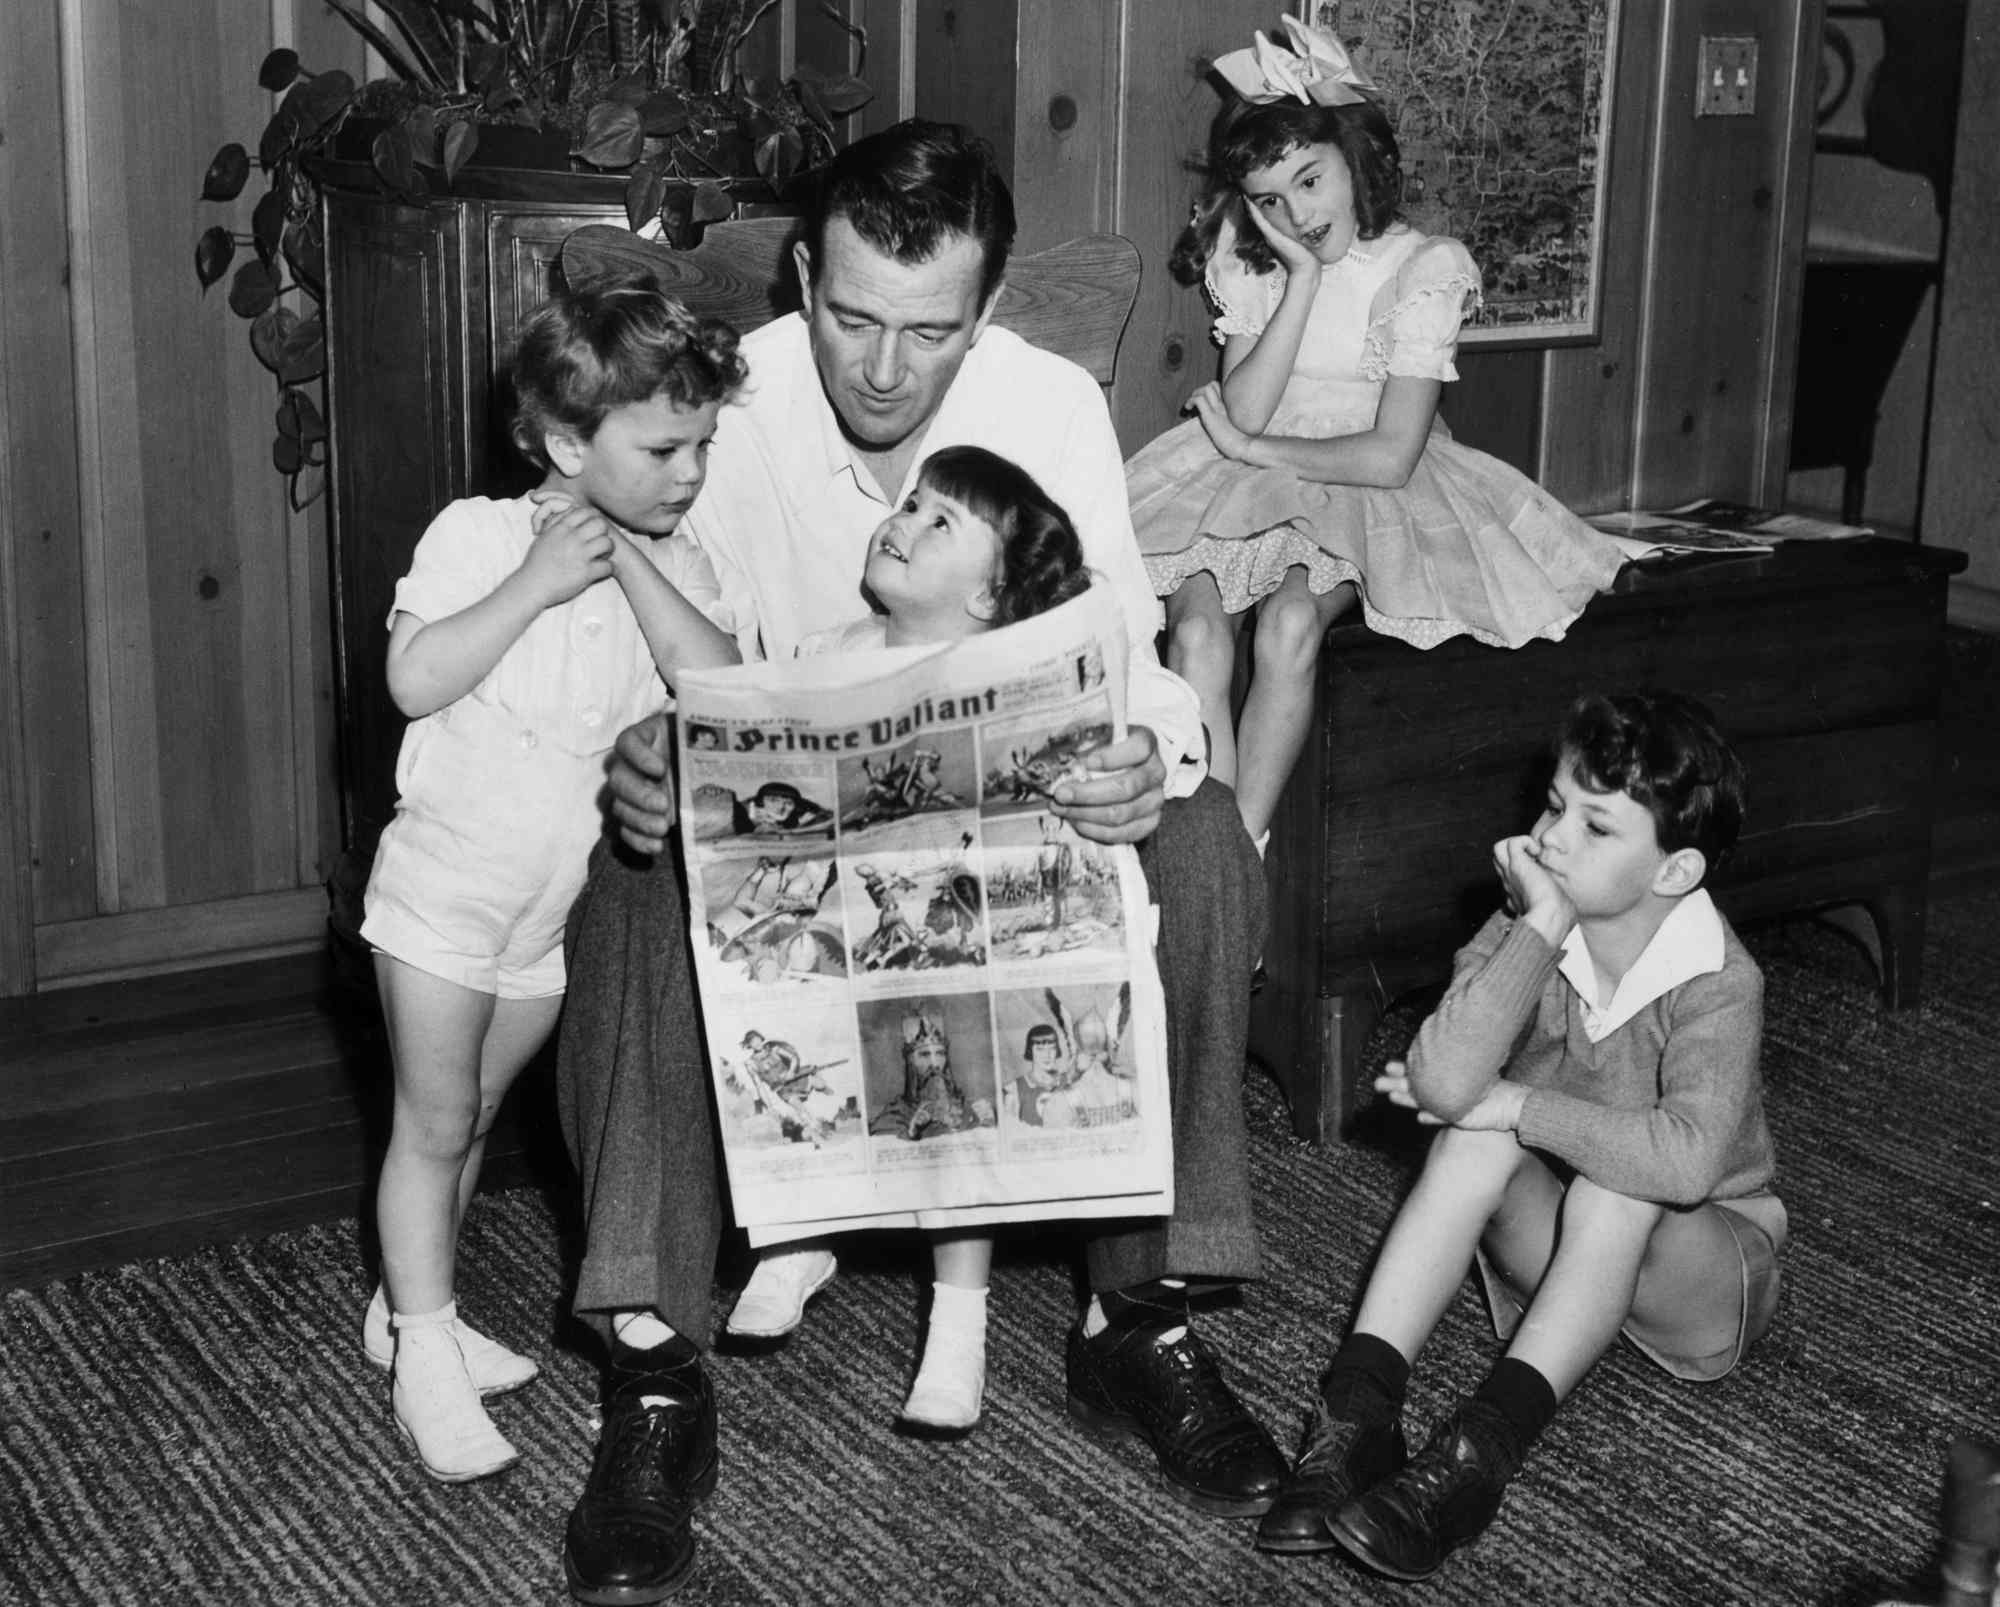 Occasional television guest star John Wayne, along with children Patrick, Melinda, Toni, and Michael. Patrick and Melinda are leaning on their father, while the other two are at the desk and on the floor.